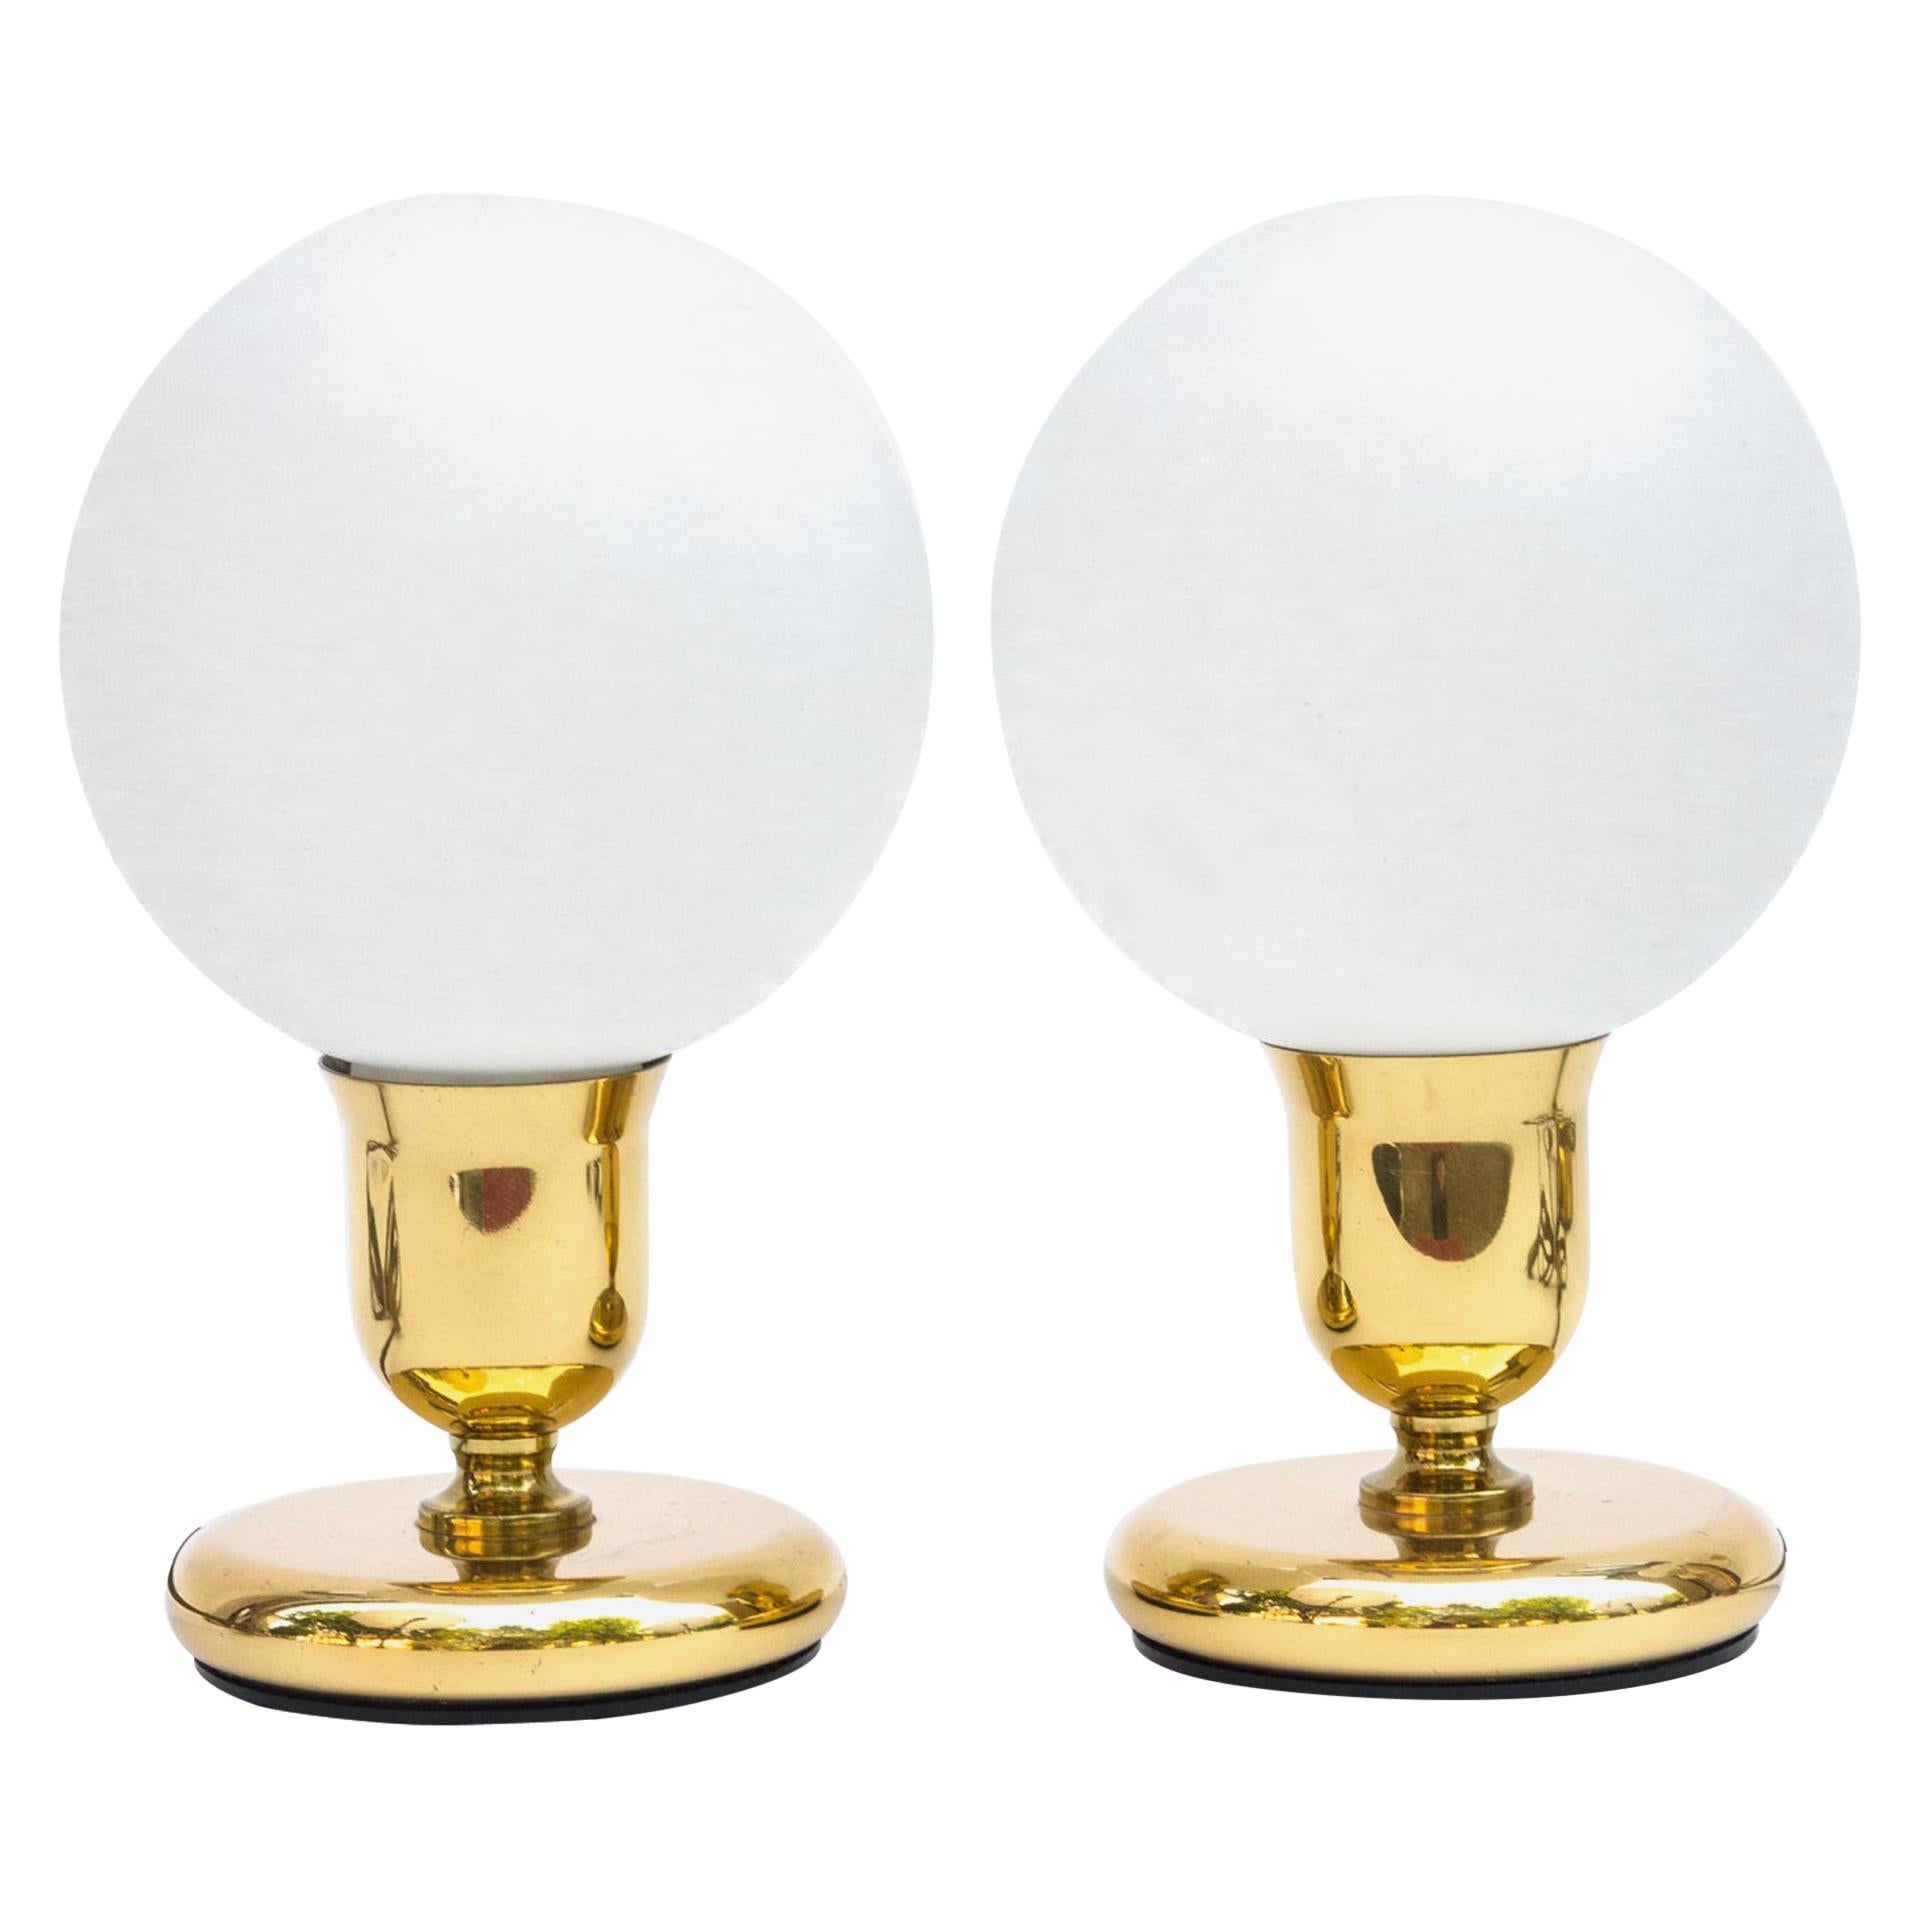 Pair of Spherical Gold Table Lamps in the Art Deco Style